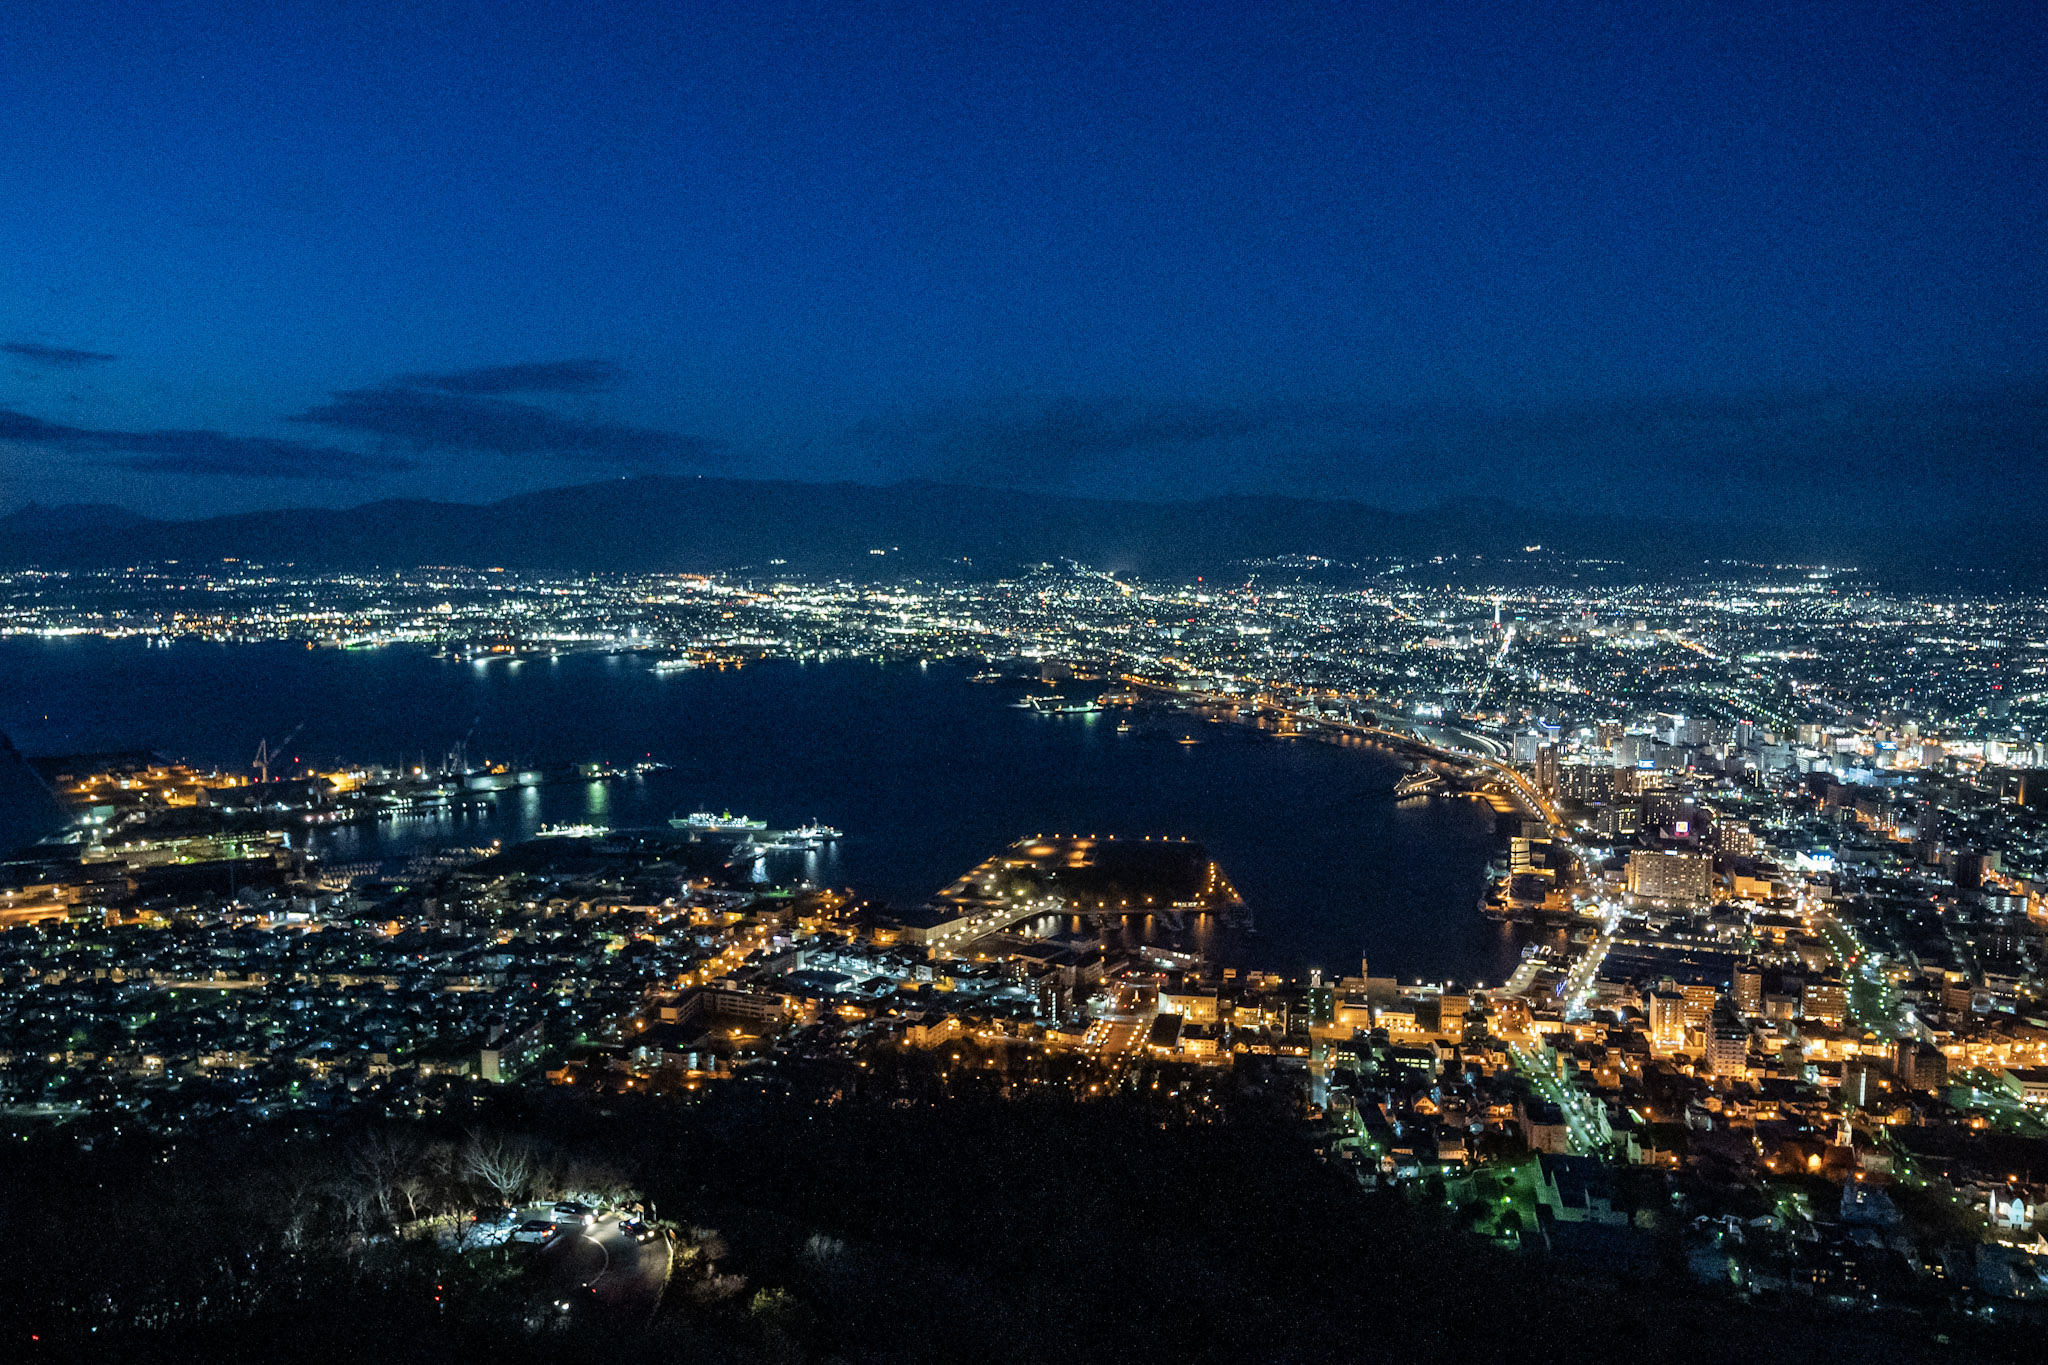 Hakodate's famlous night view. It is dark, save the view of the city illumination in the distance below. The shape of Hakodate Bay is clearly visible with the arc of the lights.